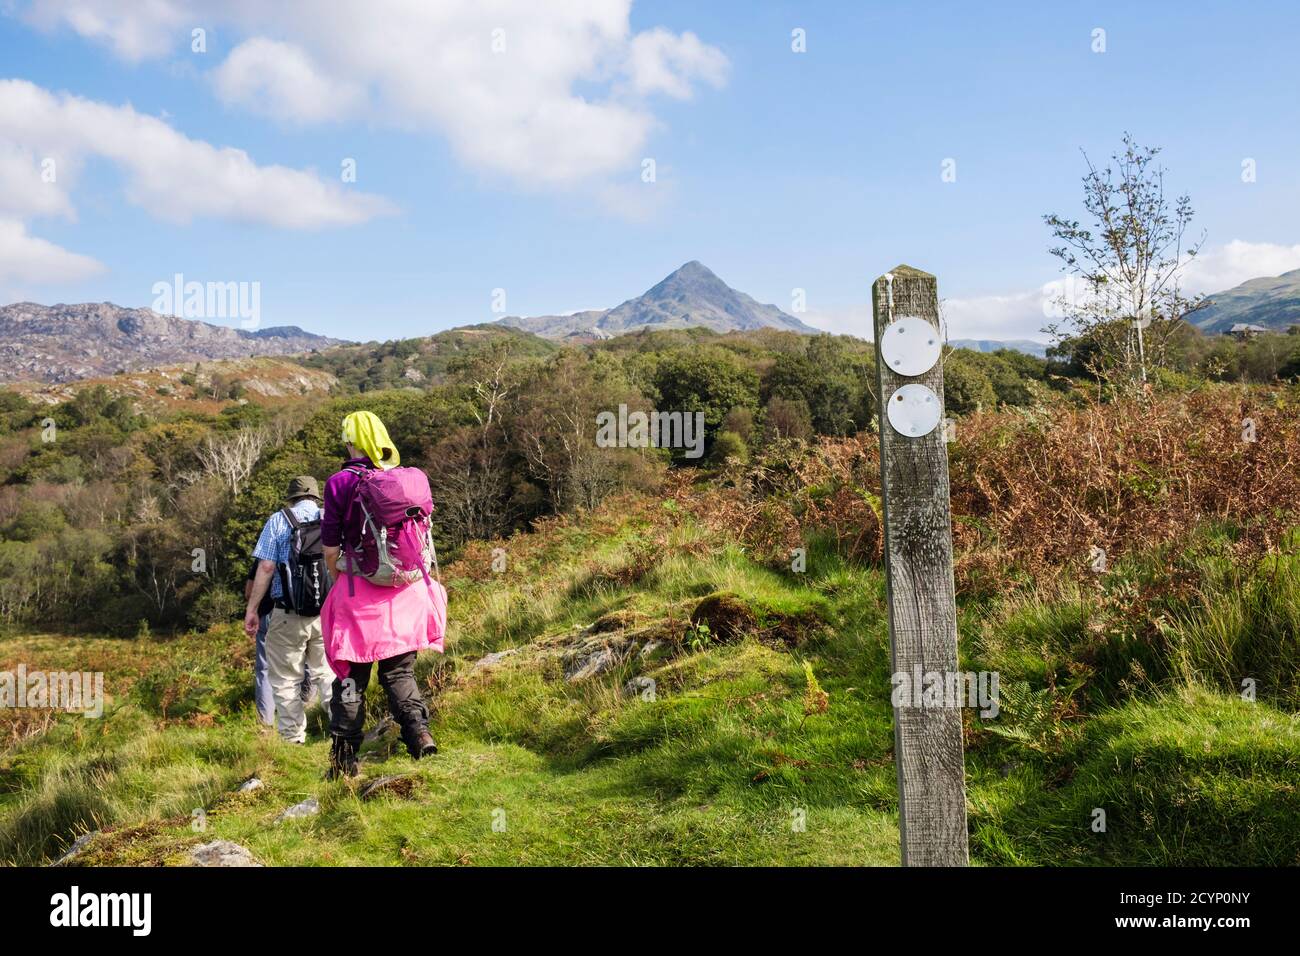 Hikers hikings on footpath in Snowdonia National Park hills with path sign and Cnicht mountain peak in distance. Croesor, Gwynedd, Wales, UK, Britain Stock Photo